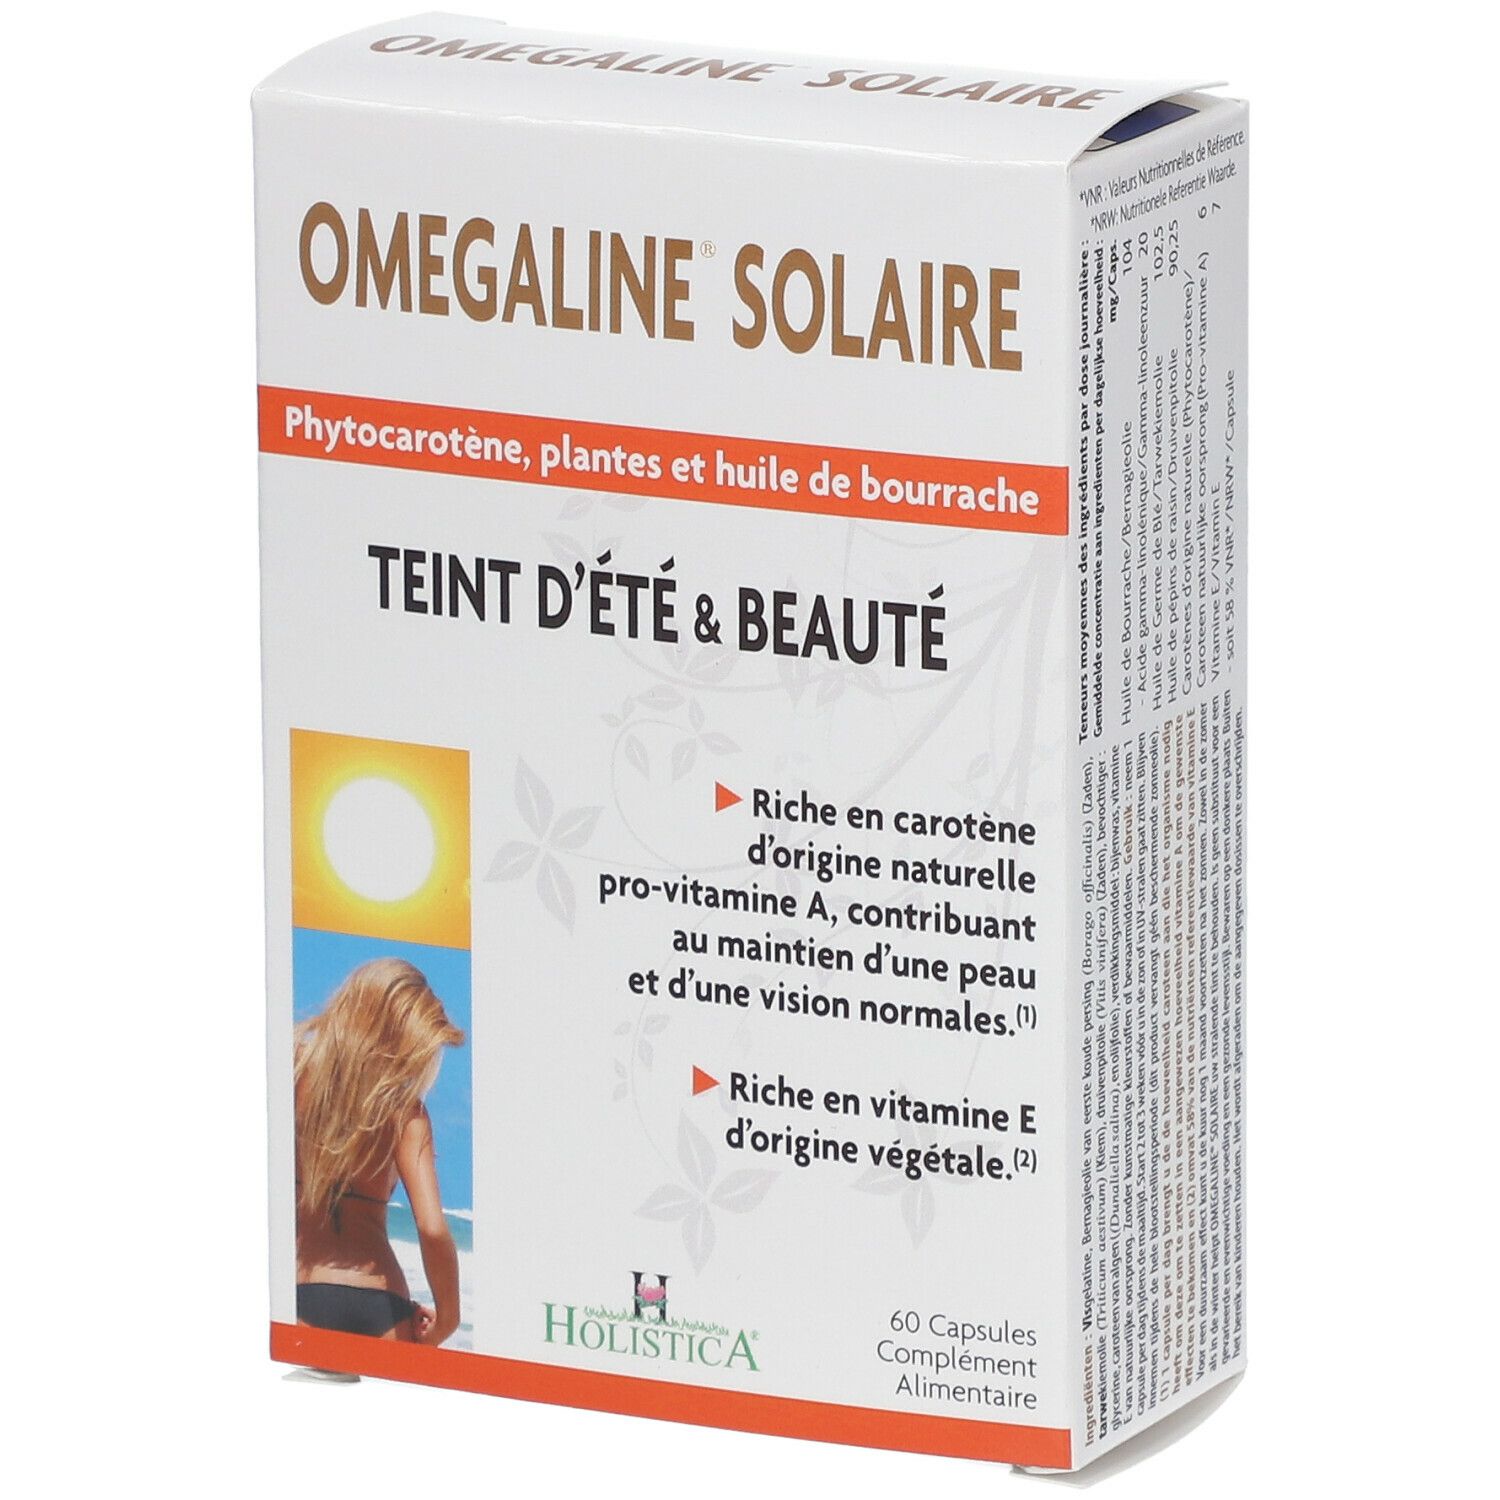 Omegaline Solaire